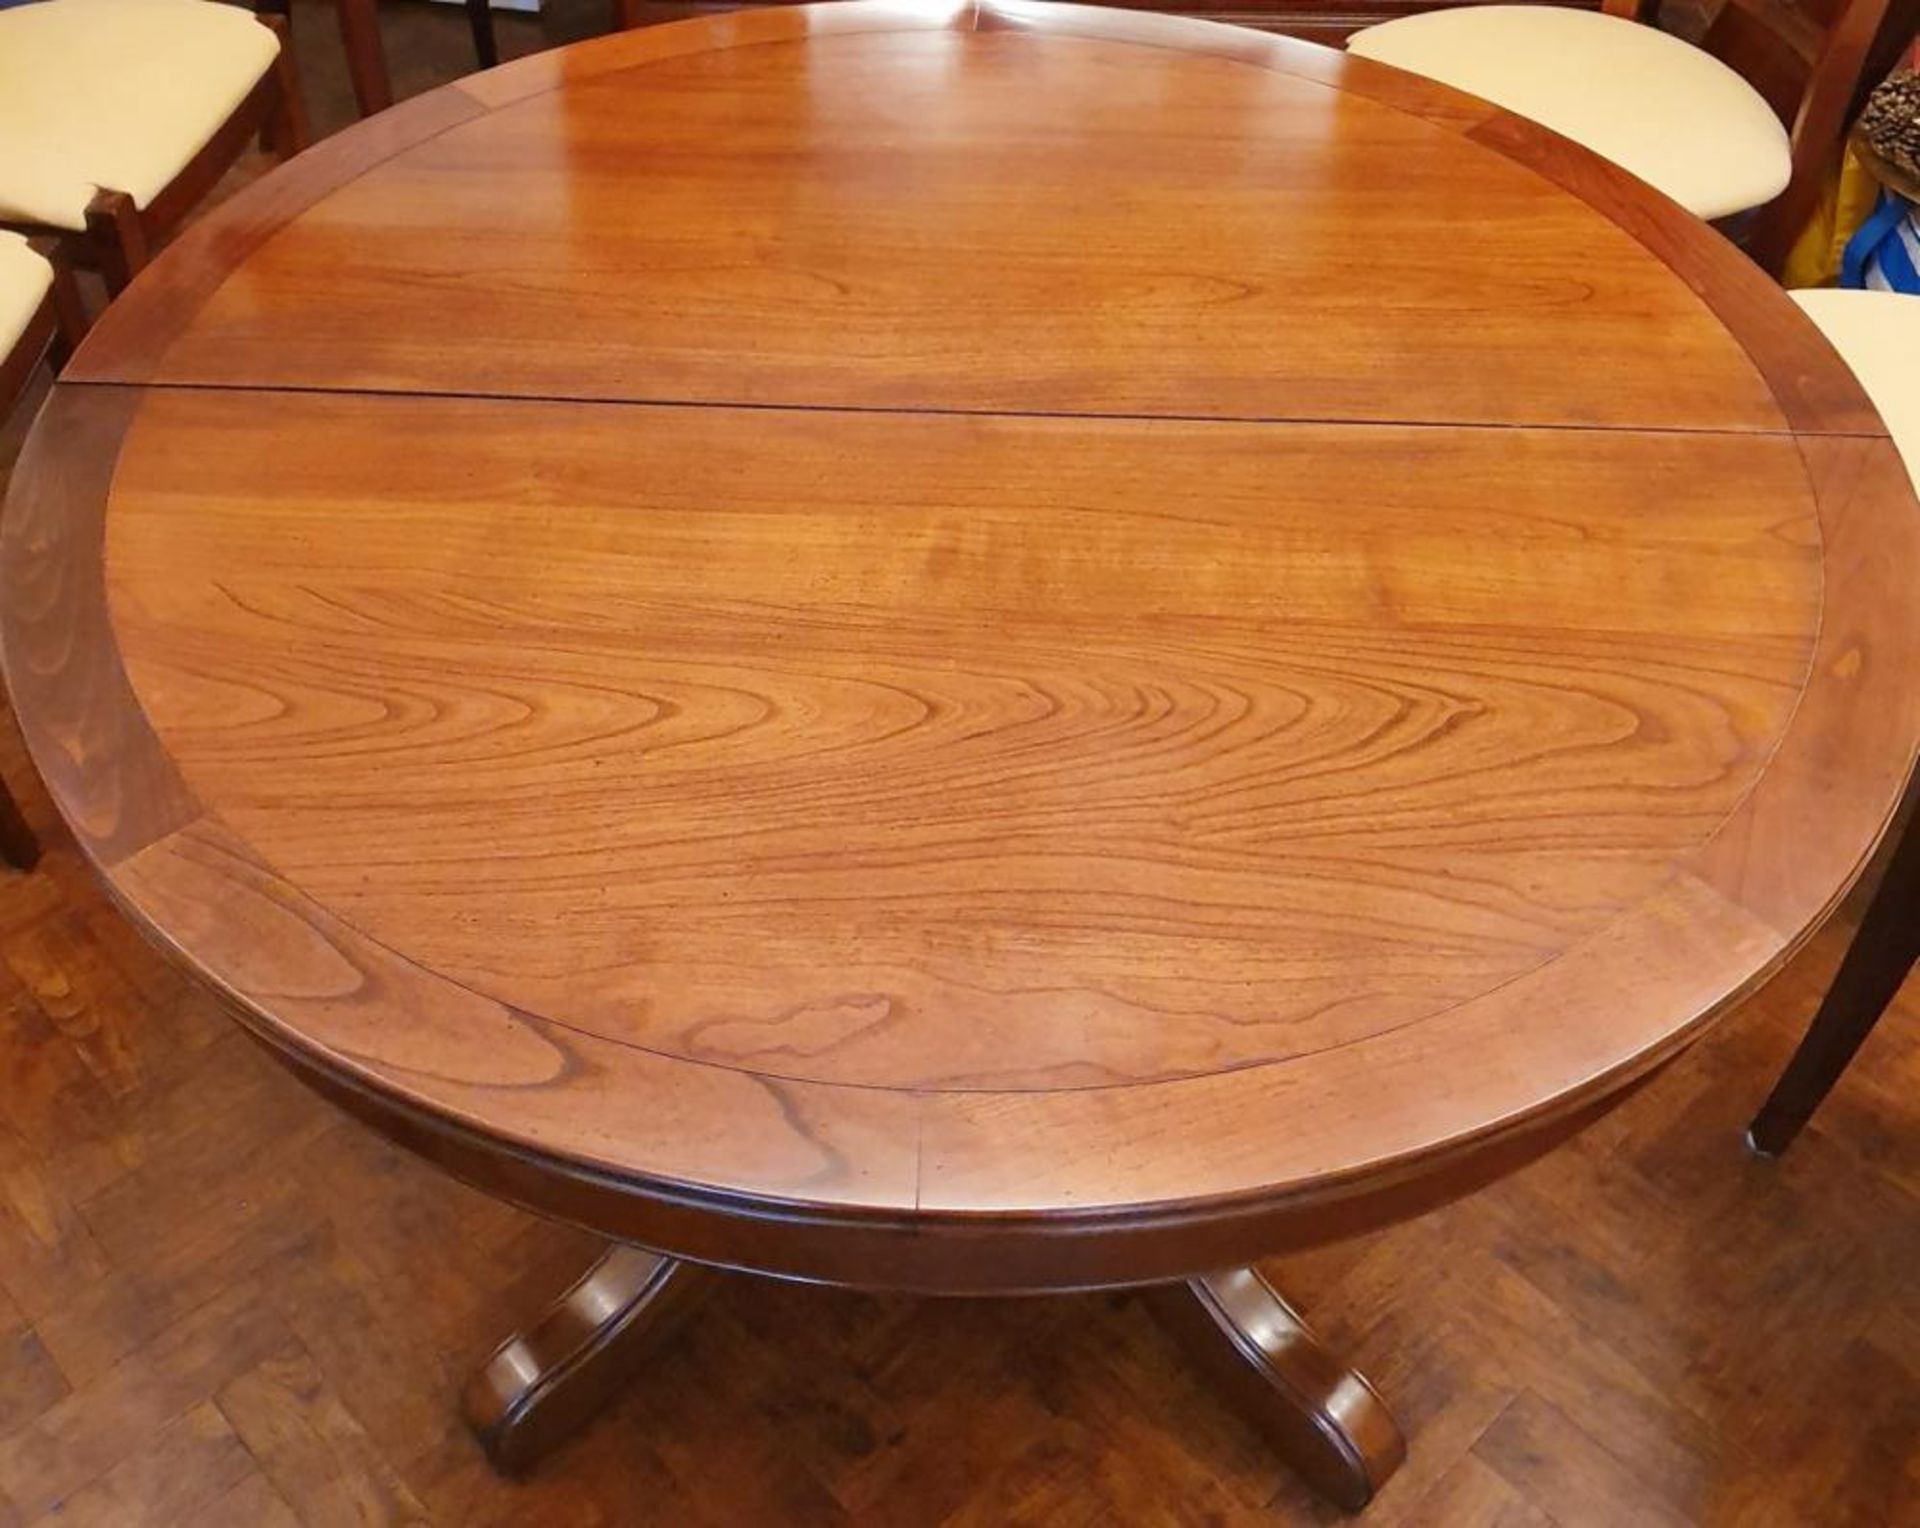 1 x GRANGE Dining Table in Solid Cherry Wood with 8 Matching Chairs - CL473 - Location: Bowdon WA14 - Image 3 of 18